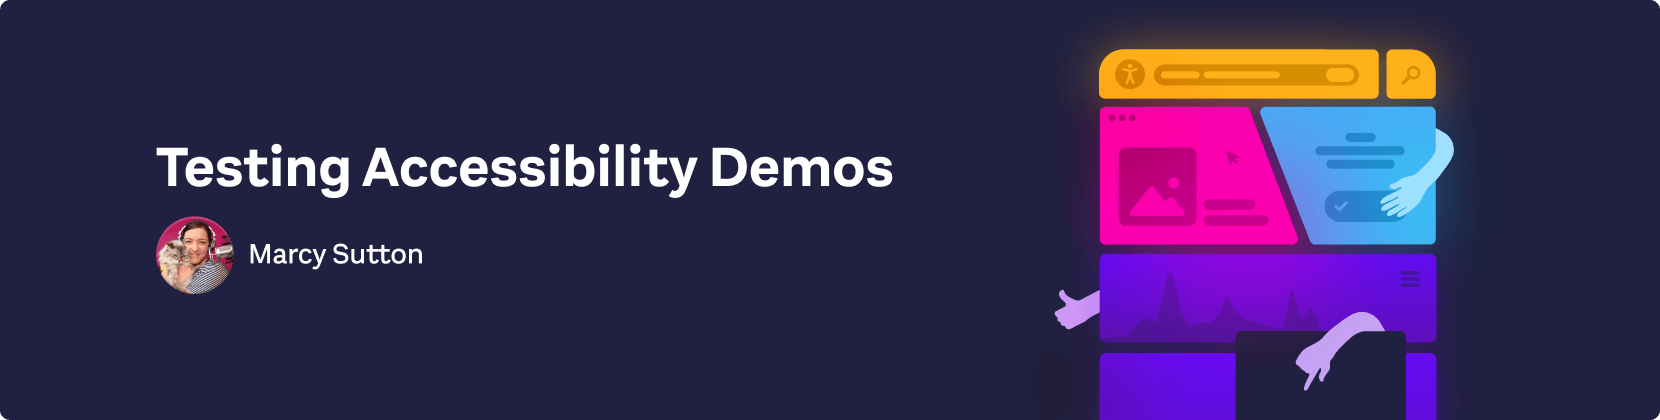 Testing Accessibility Demos by Marcy Sutton